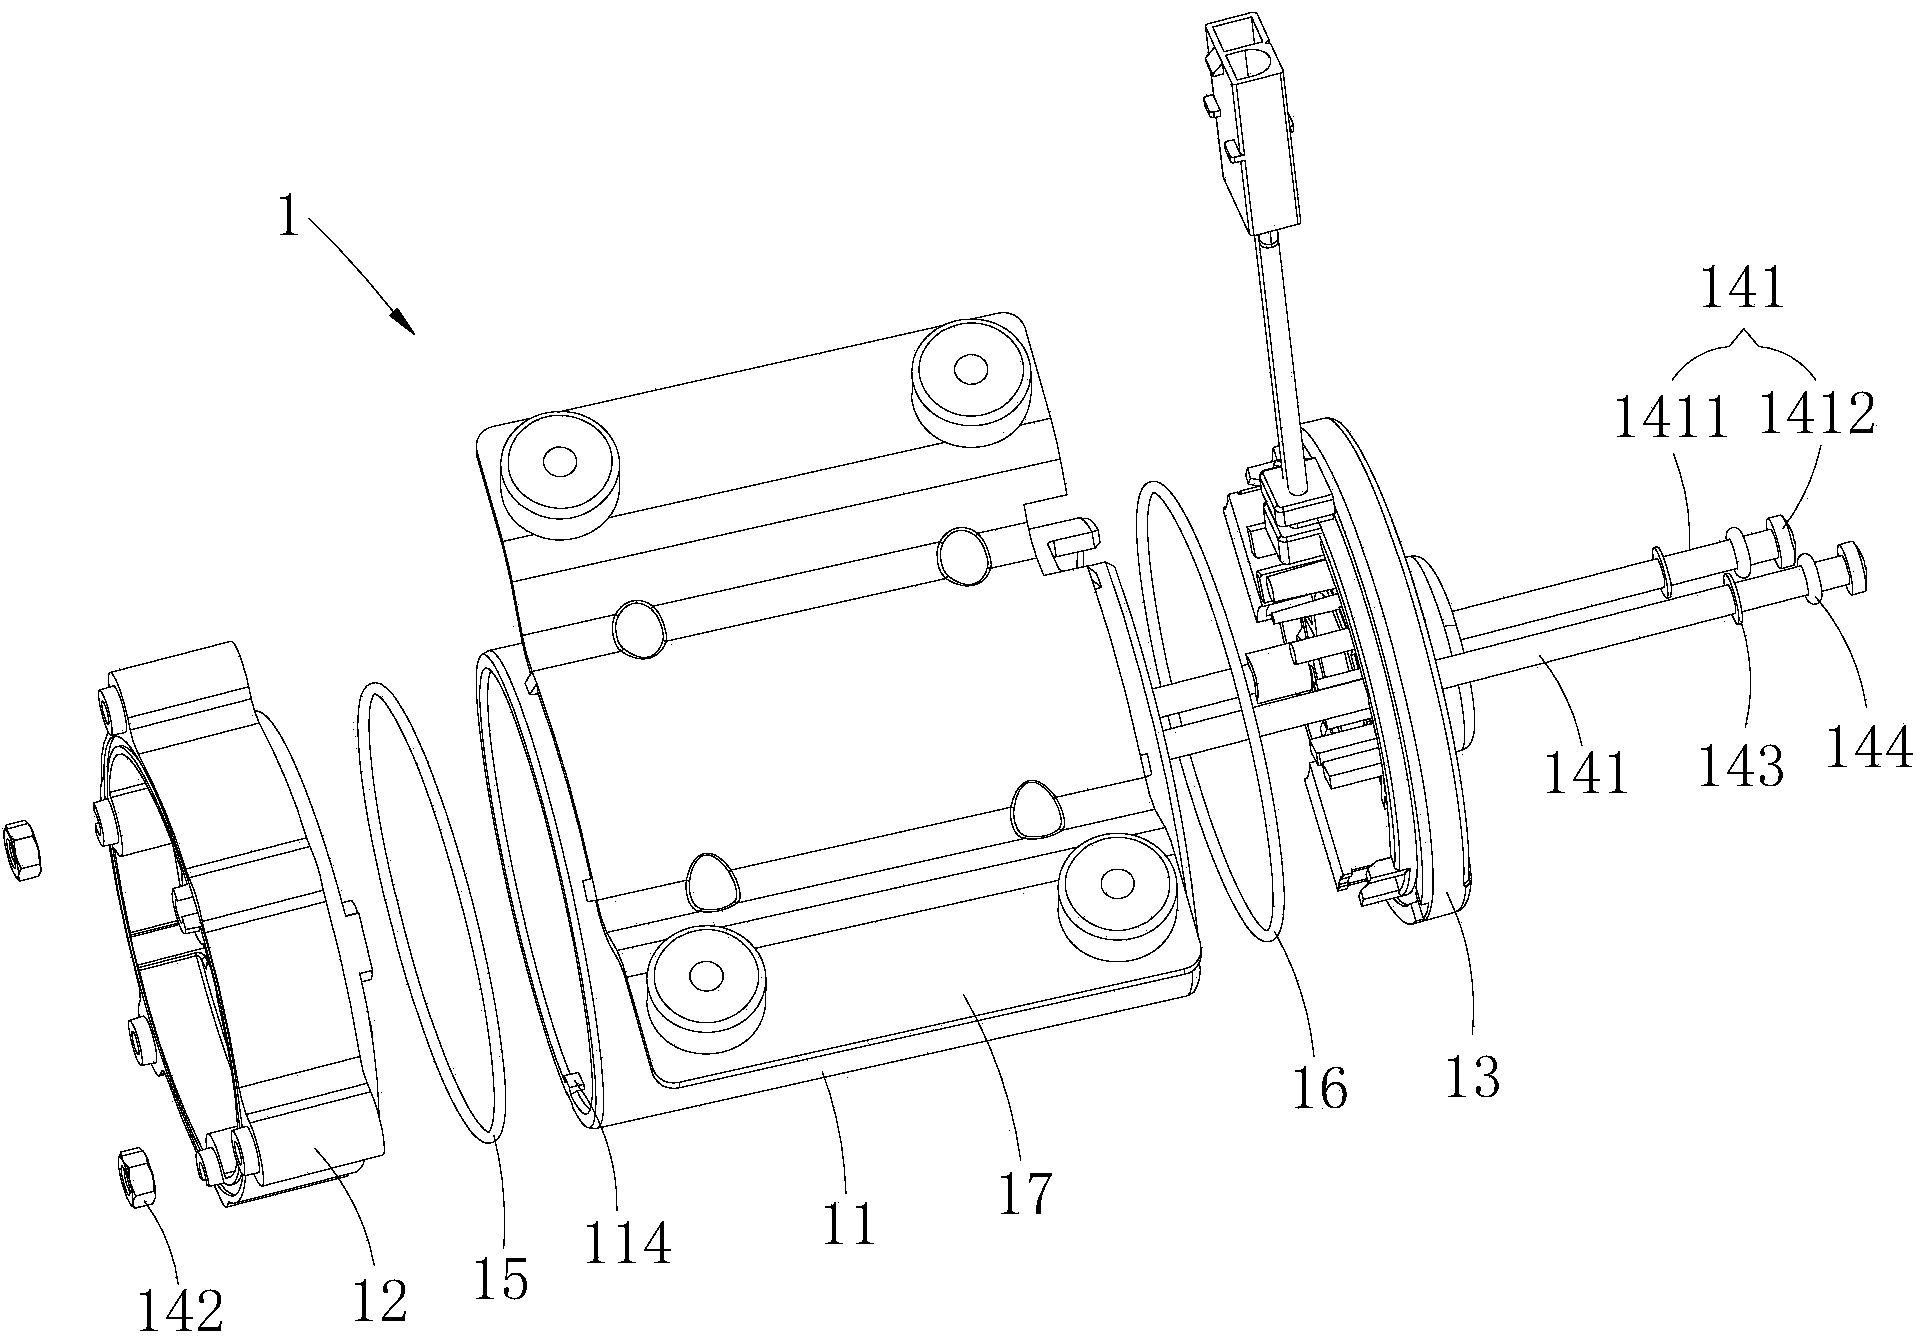 Motor of booster pump and booster pump with the same